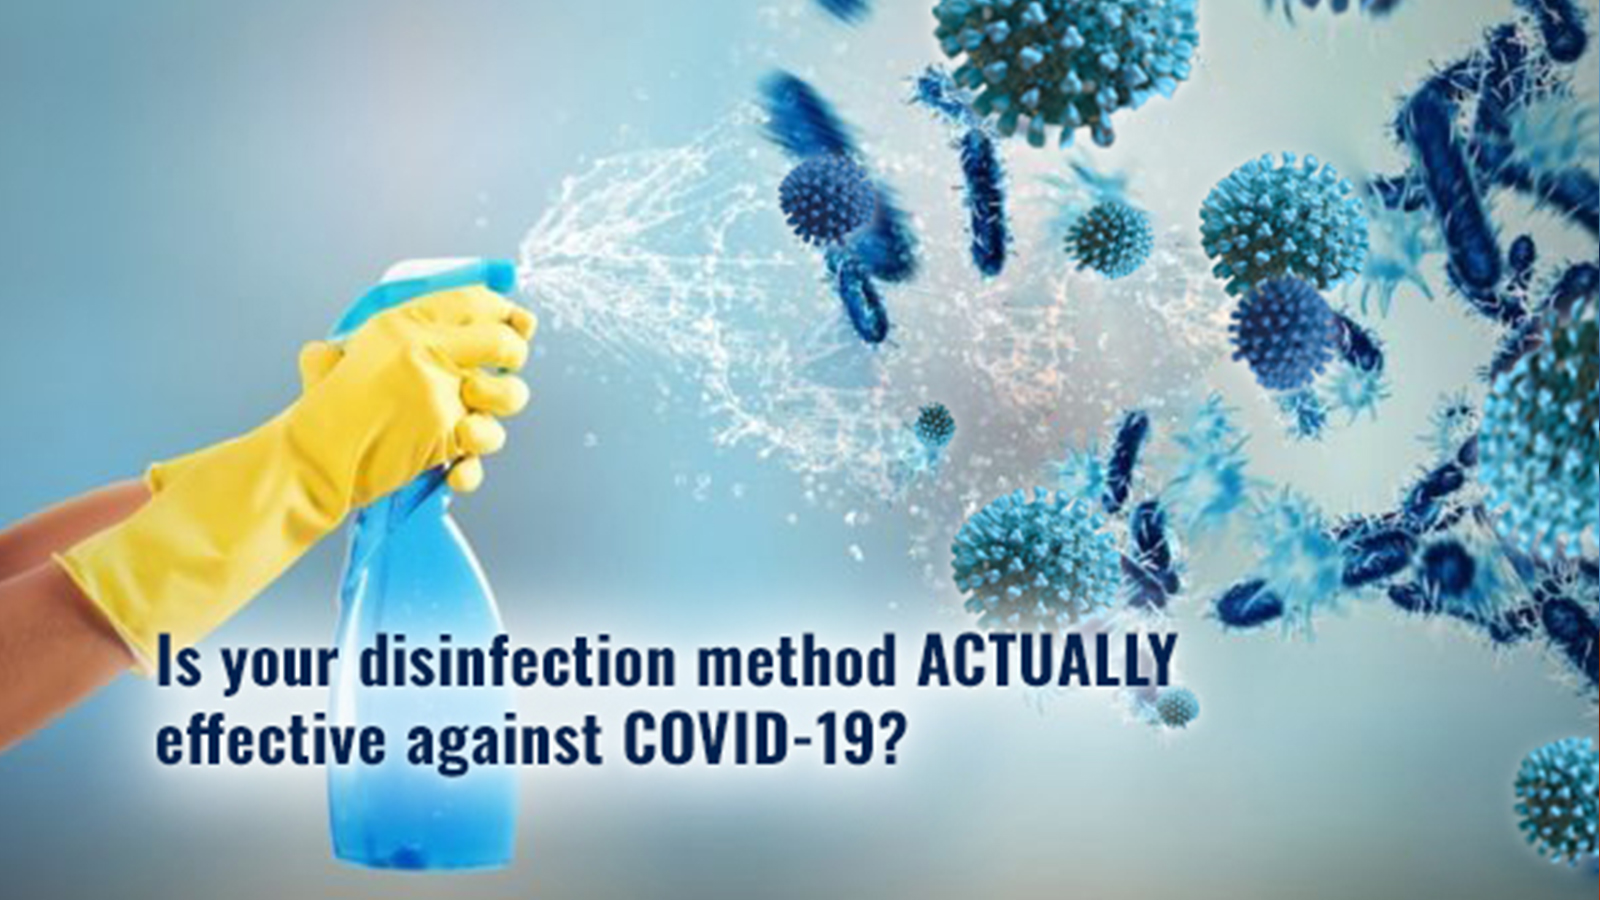 Validating Covid-19 Cleaning Procedures